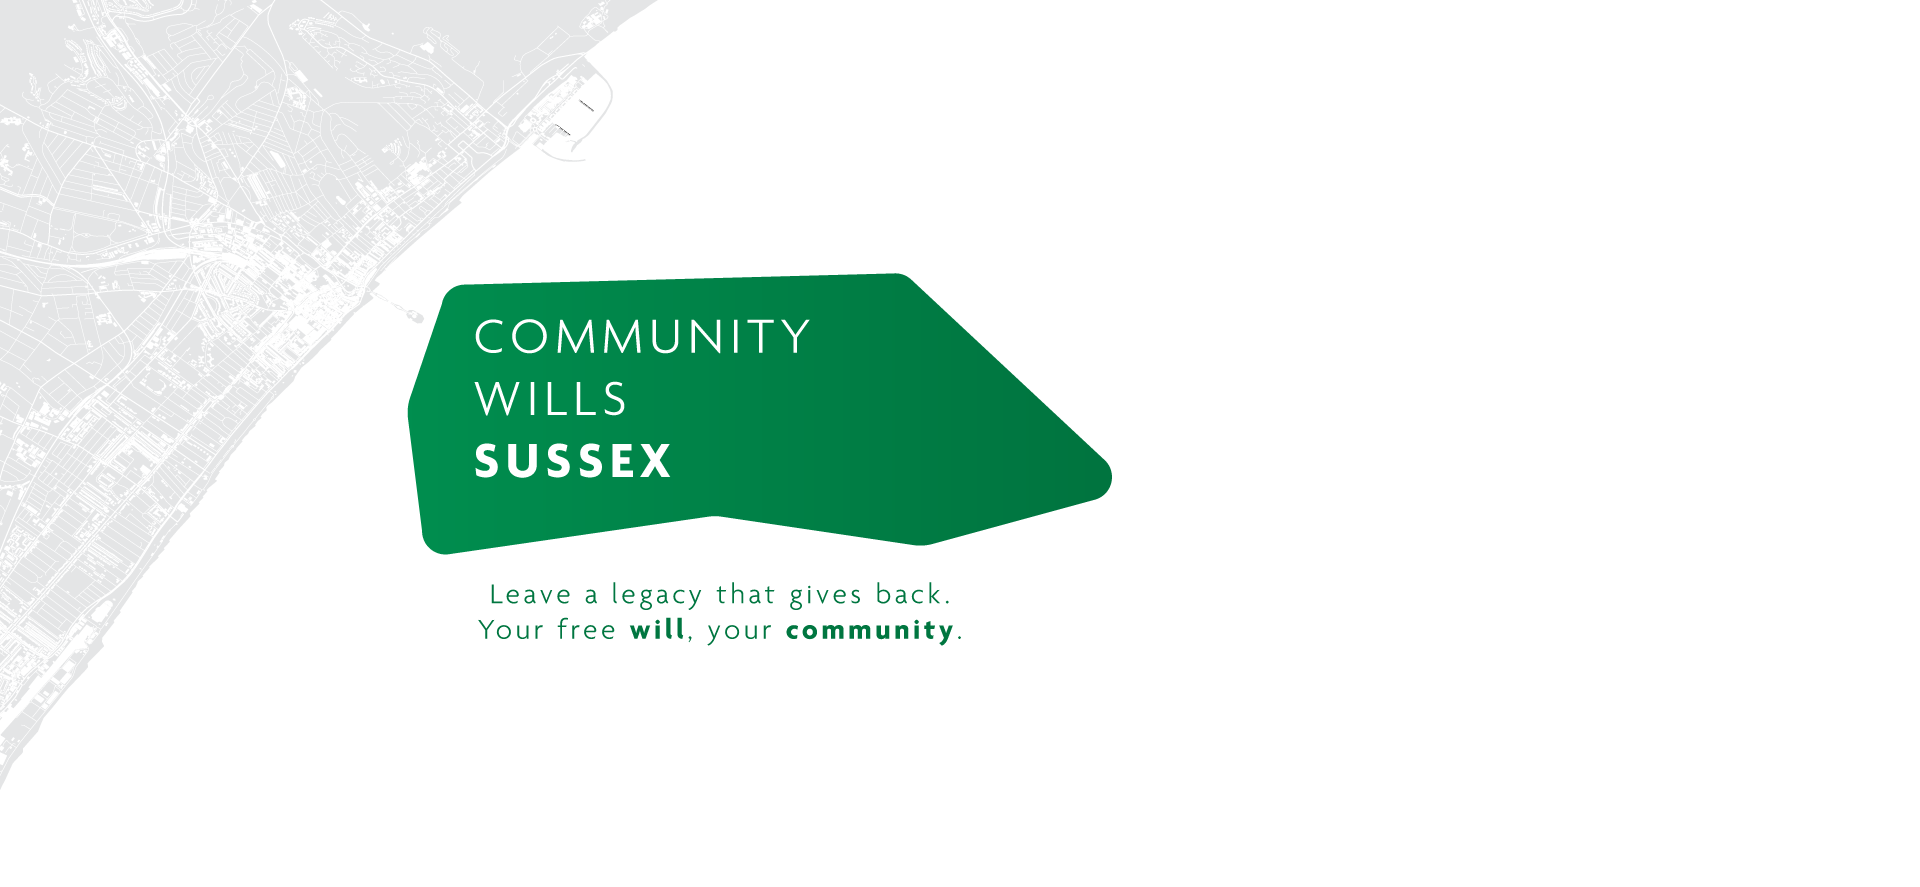 Free Wills Scheme Sussex - Leave a legacy that gives back. Your free Will, your community.